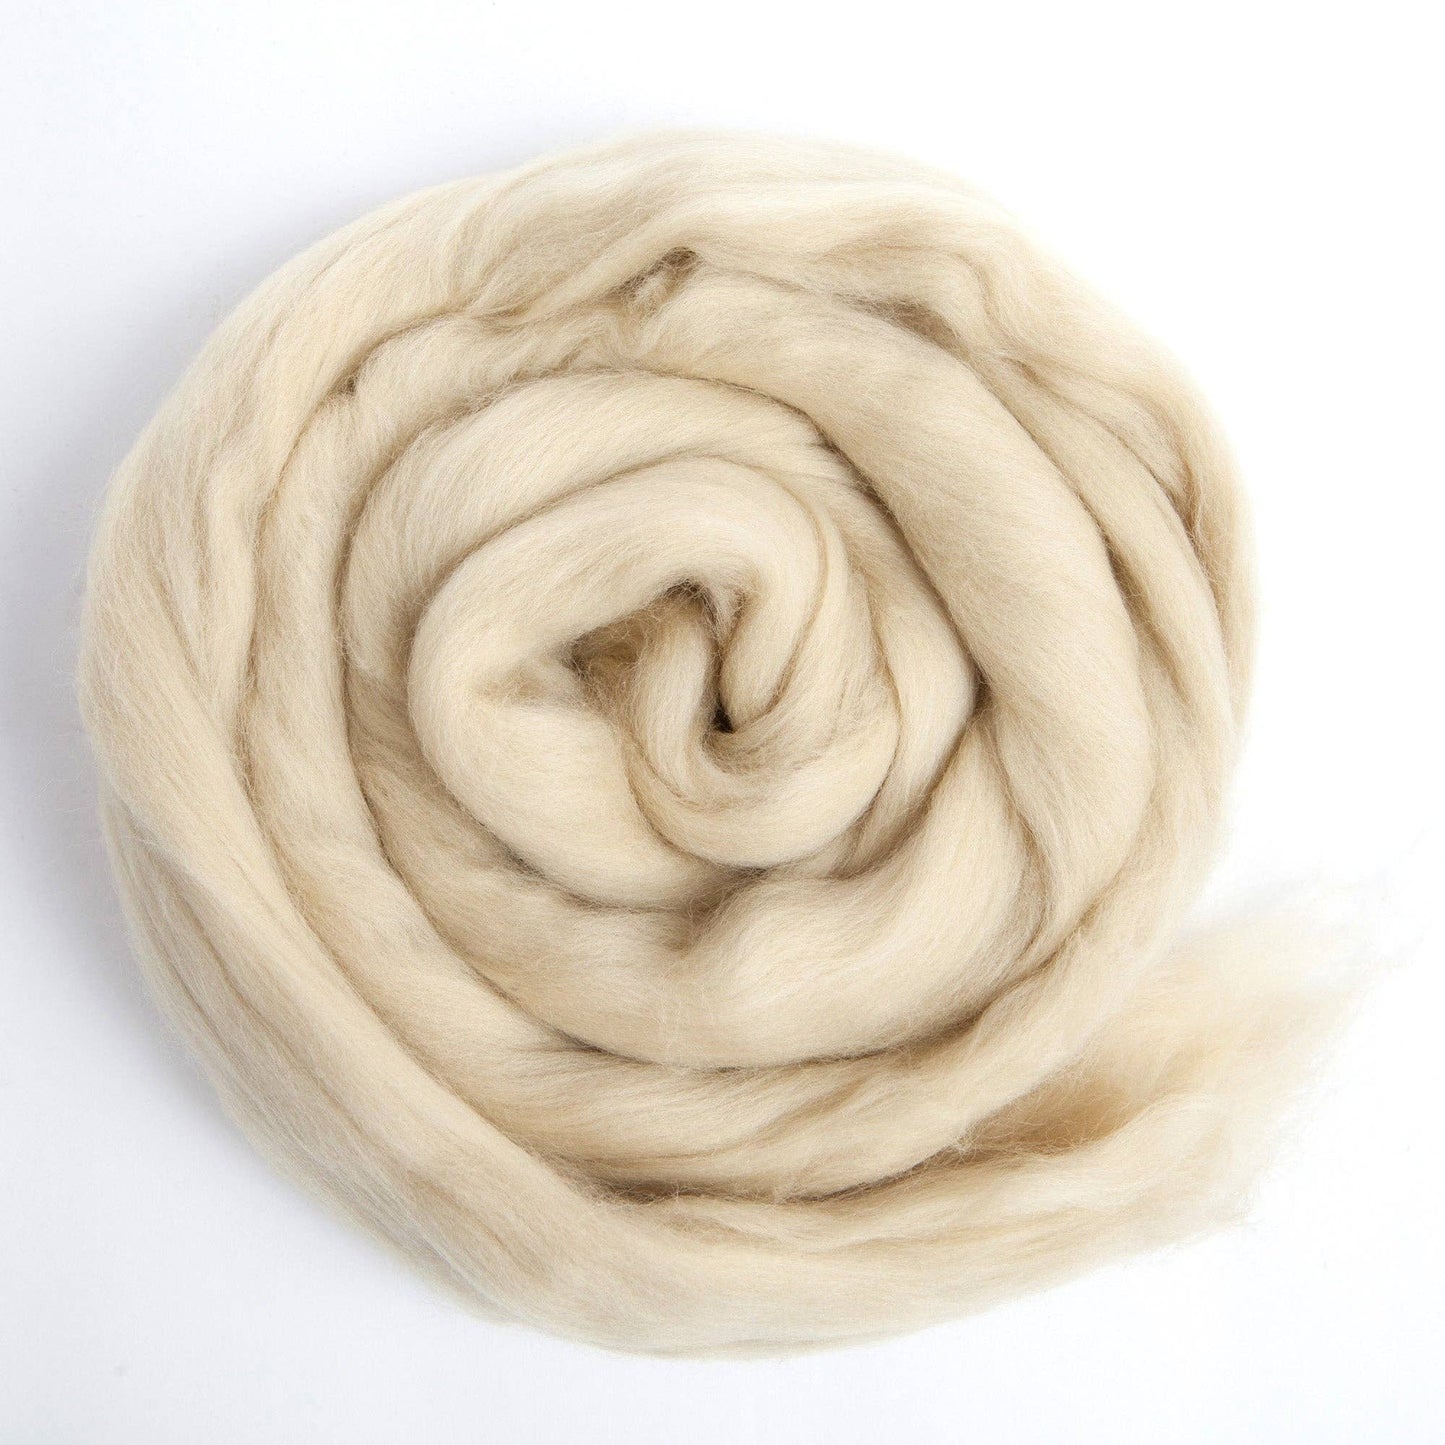 Parchment Merino Roving - 1 ounce